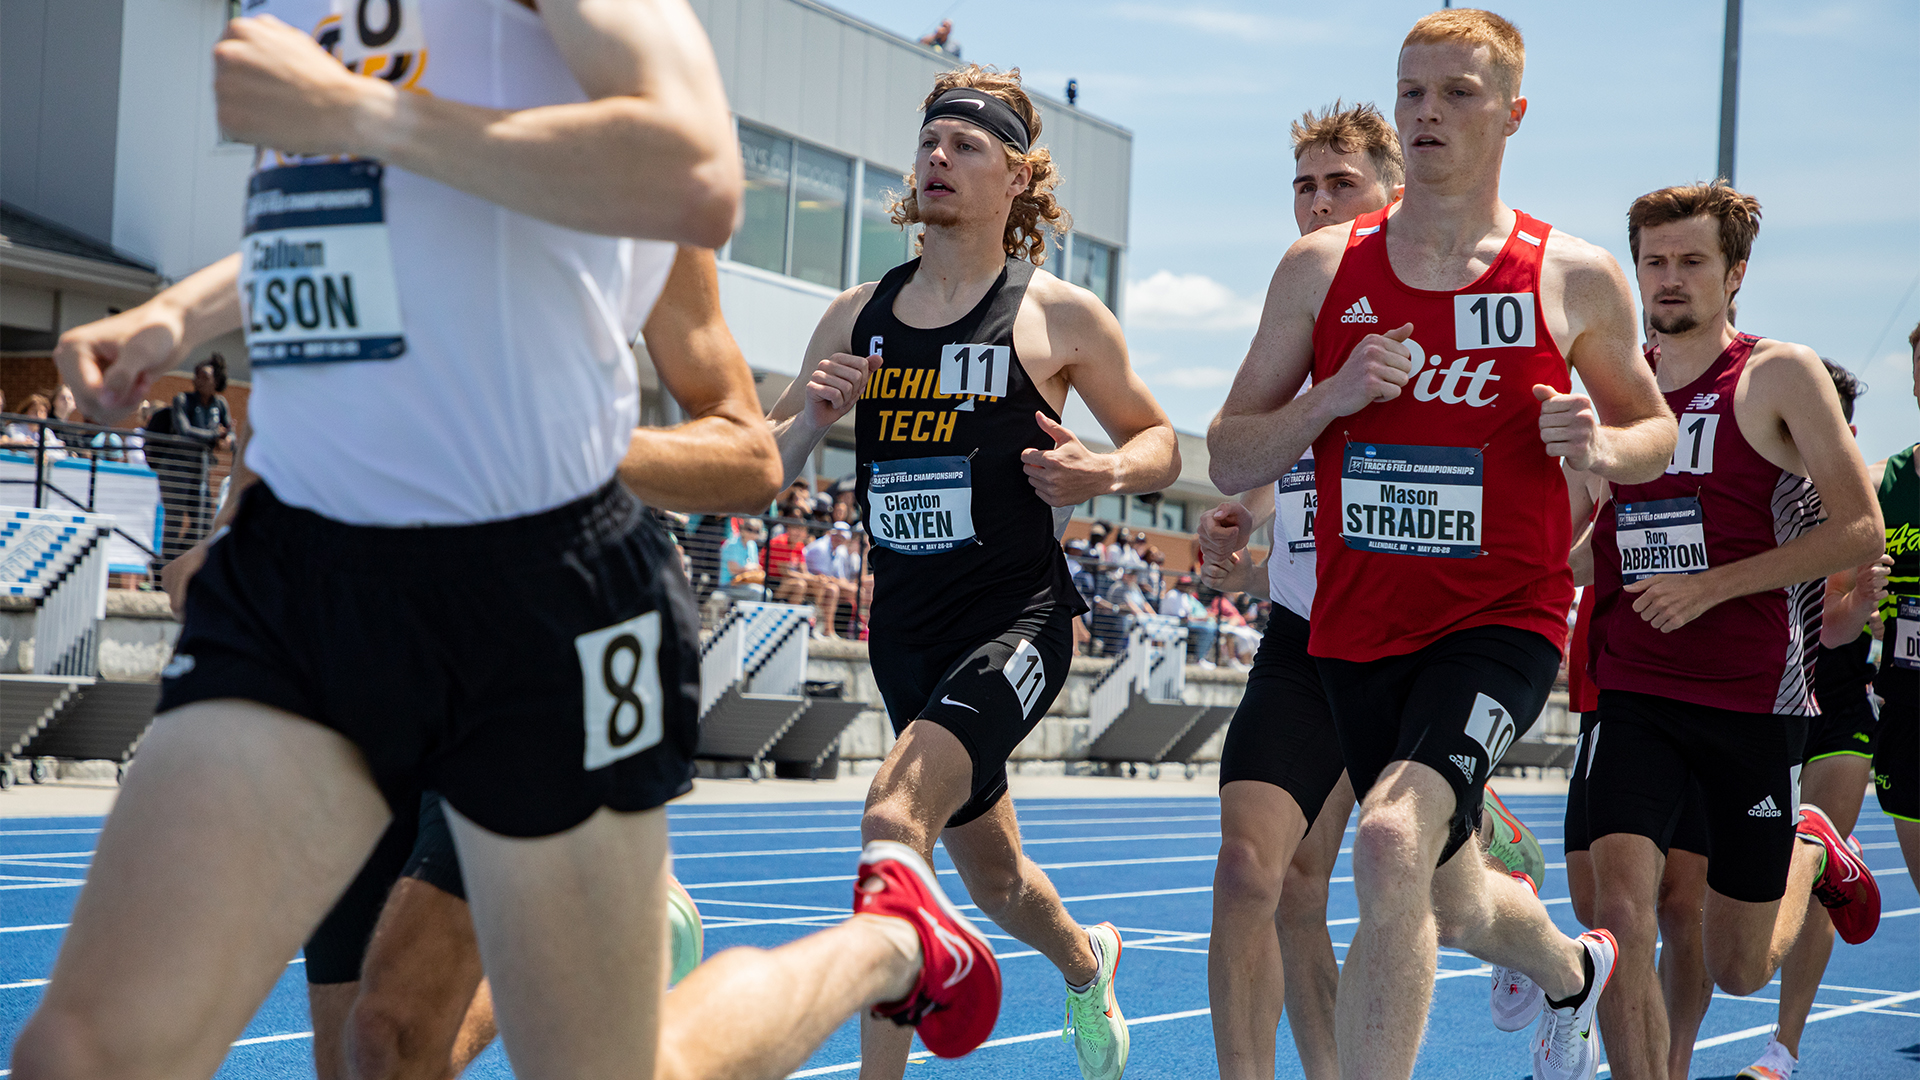 Sayen places 11th at NCAA Championships 1500 meter finals